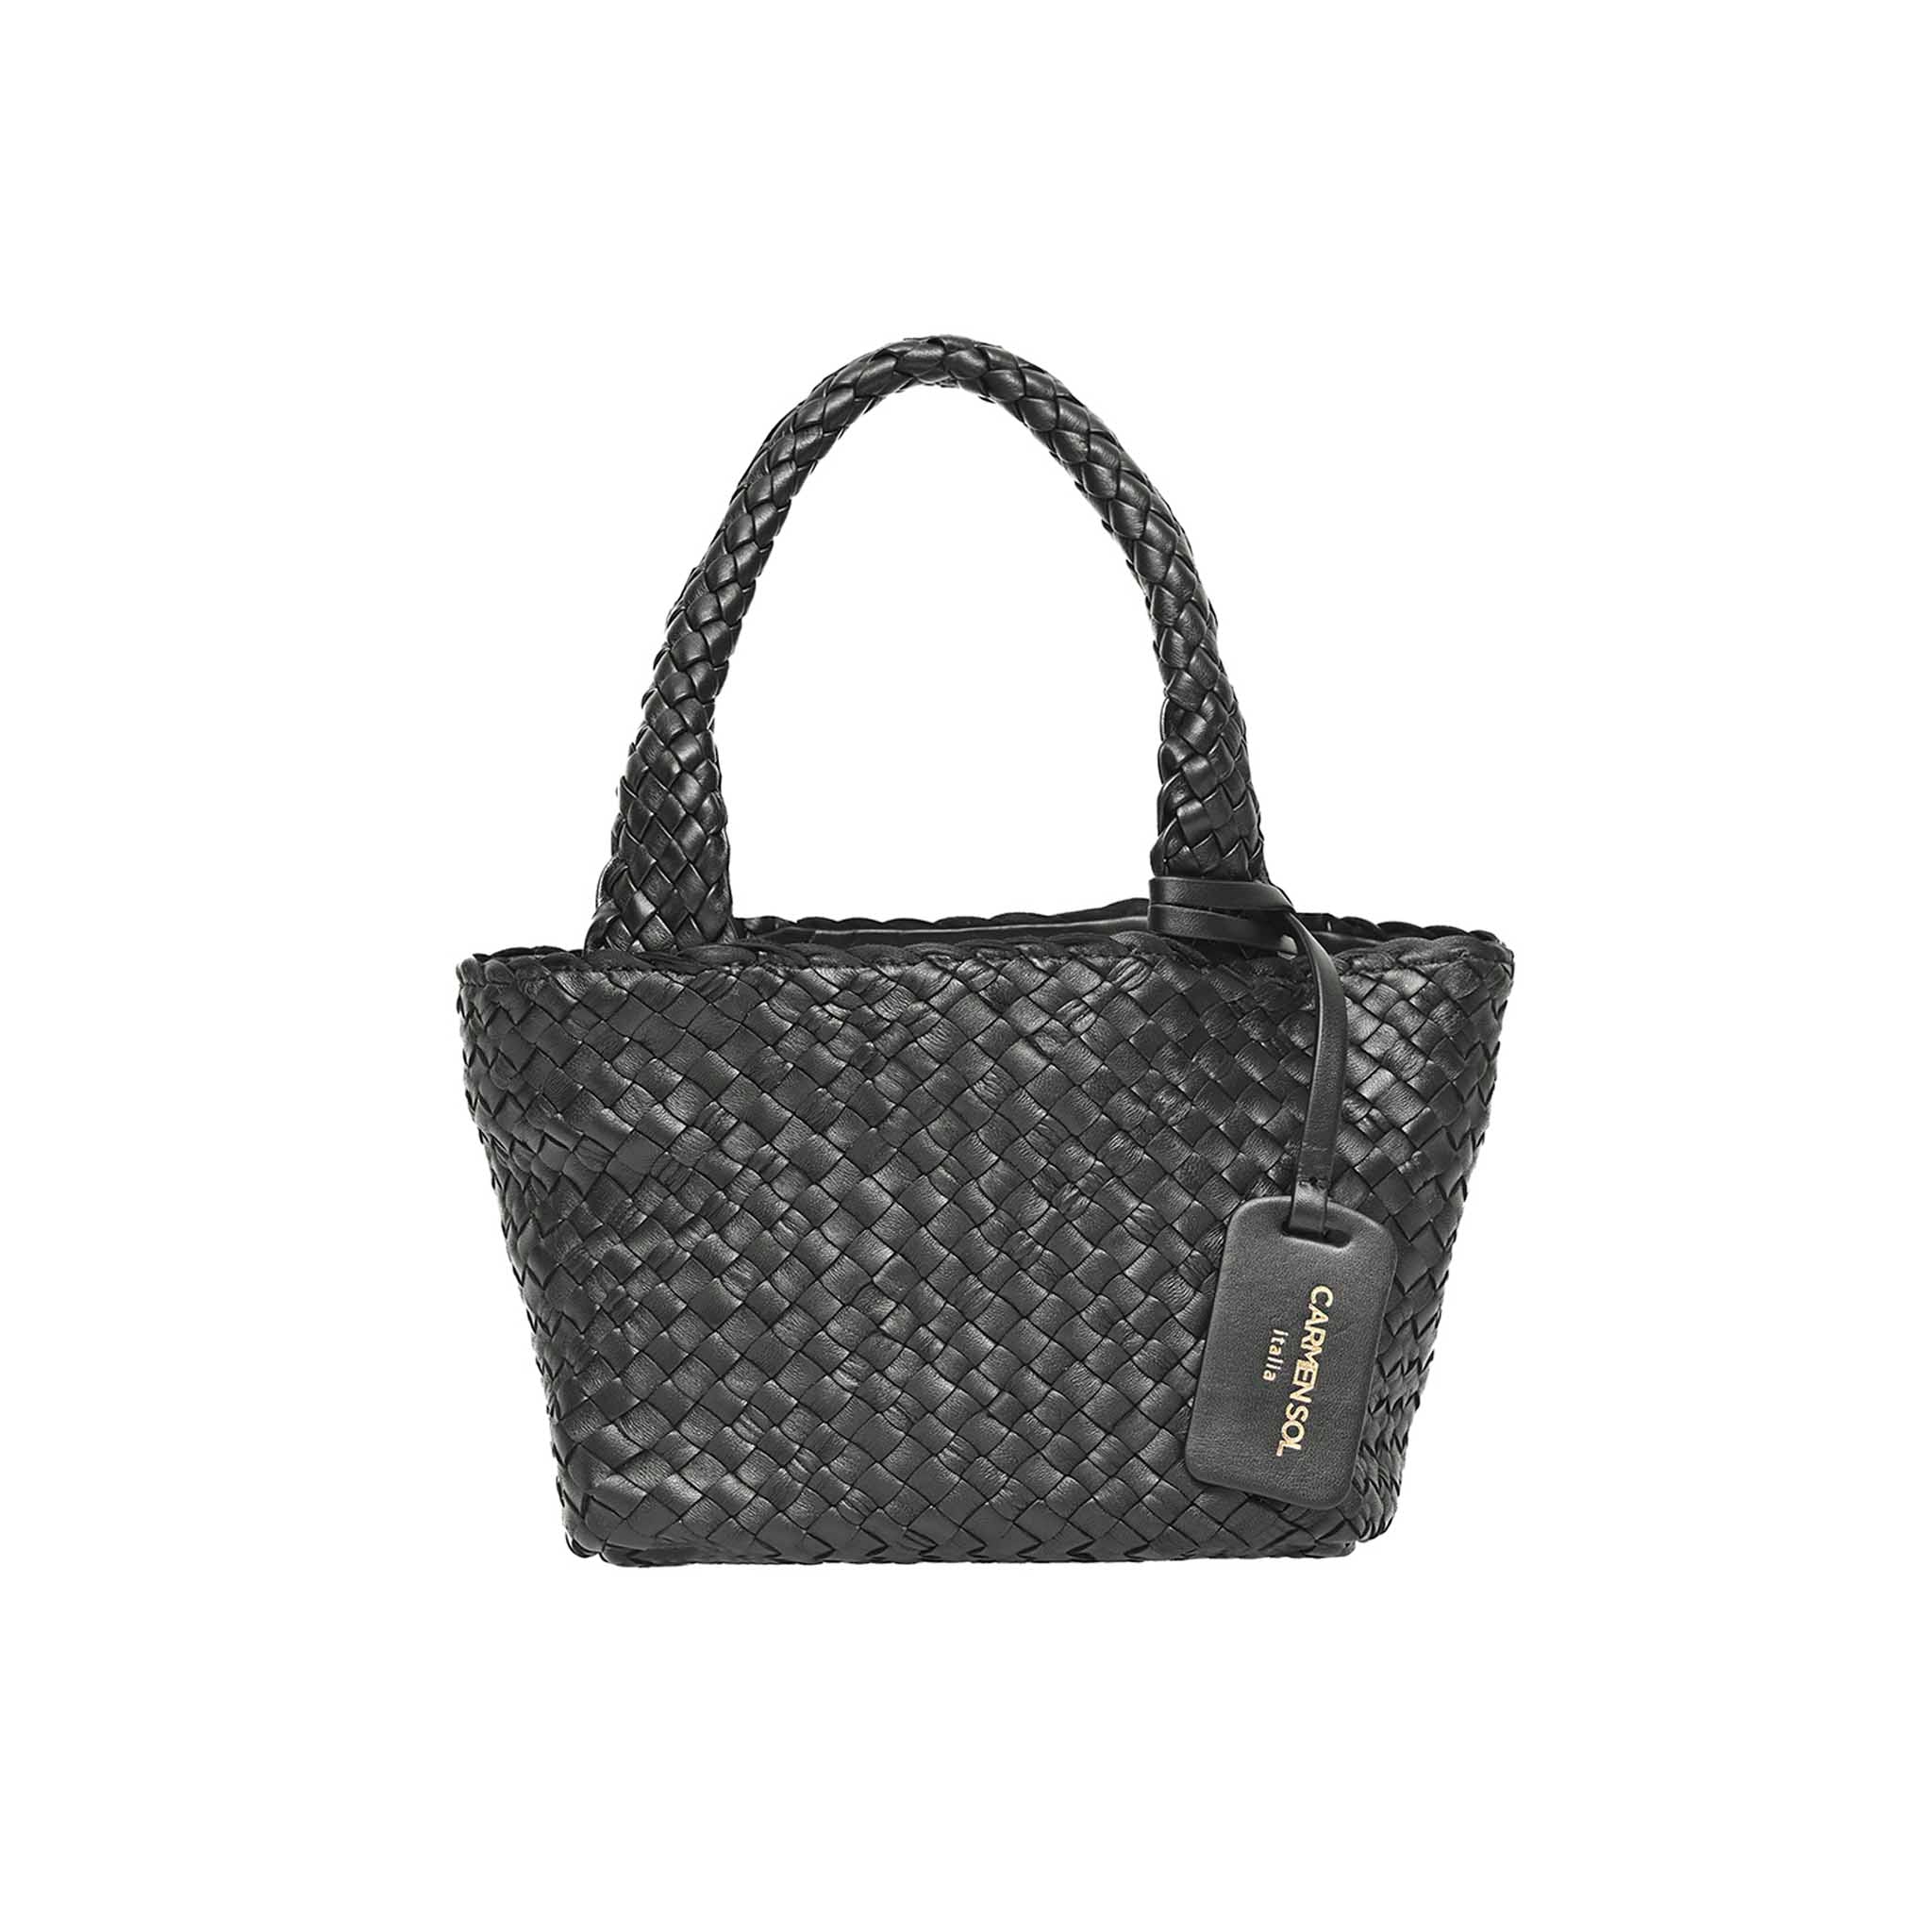 Buy Elba mini leather bag, Small Tote, leather bags for women